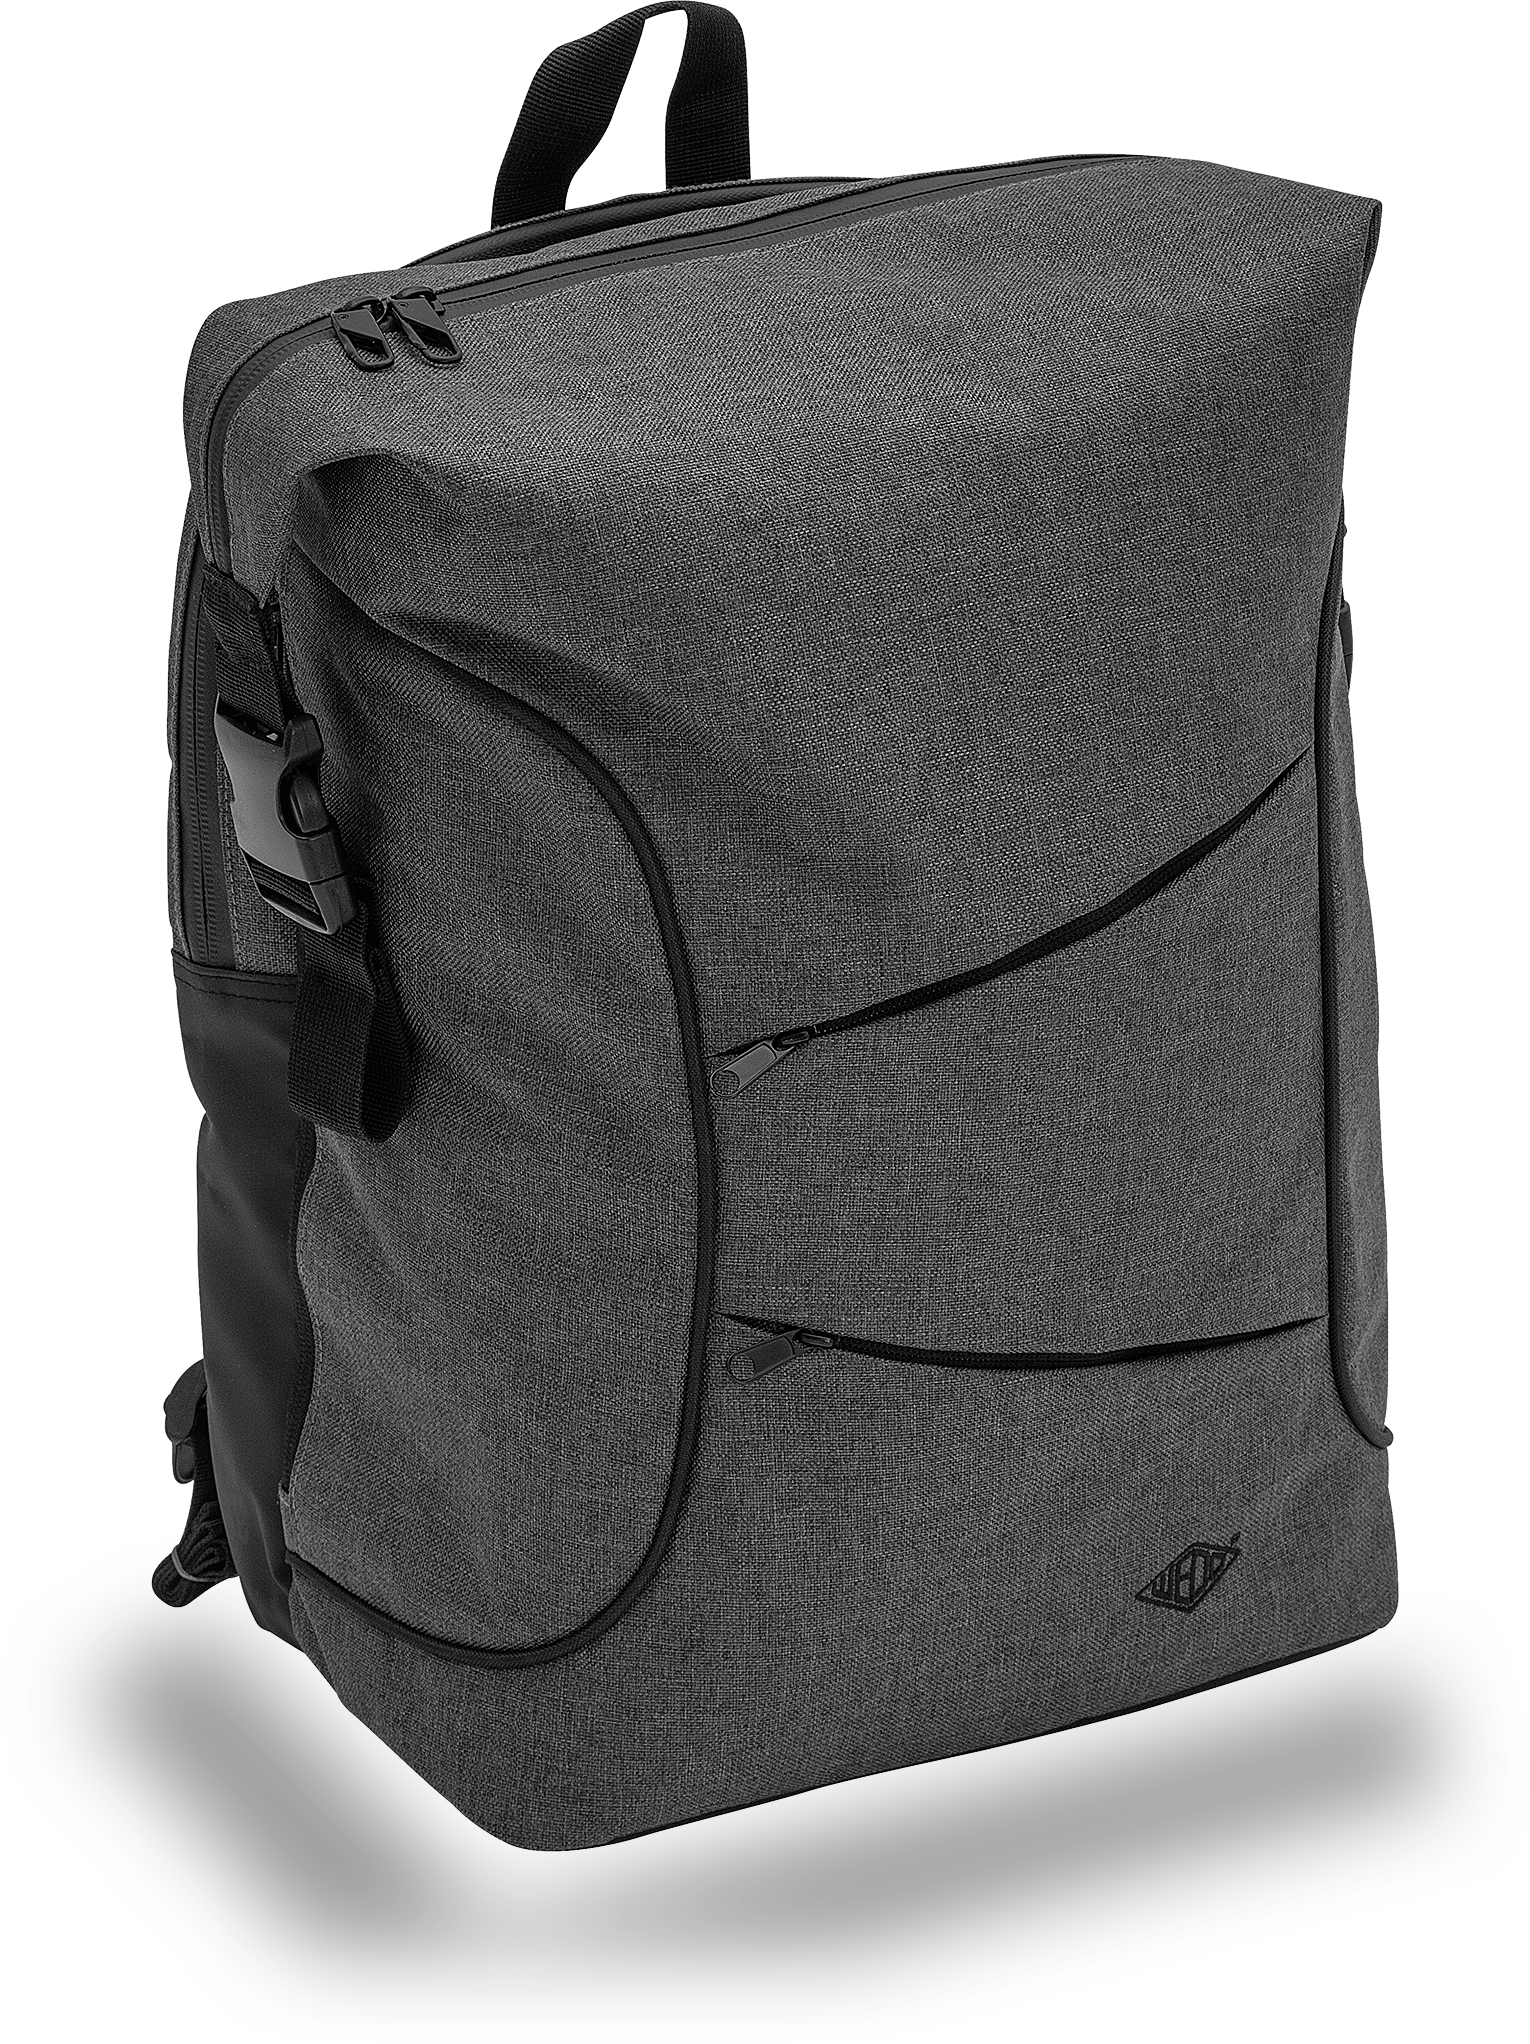 Business Backpack Free PNG Image